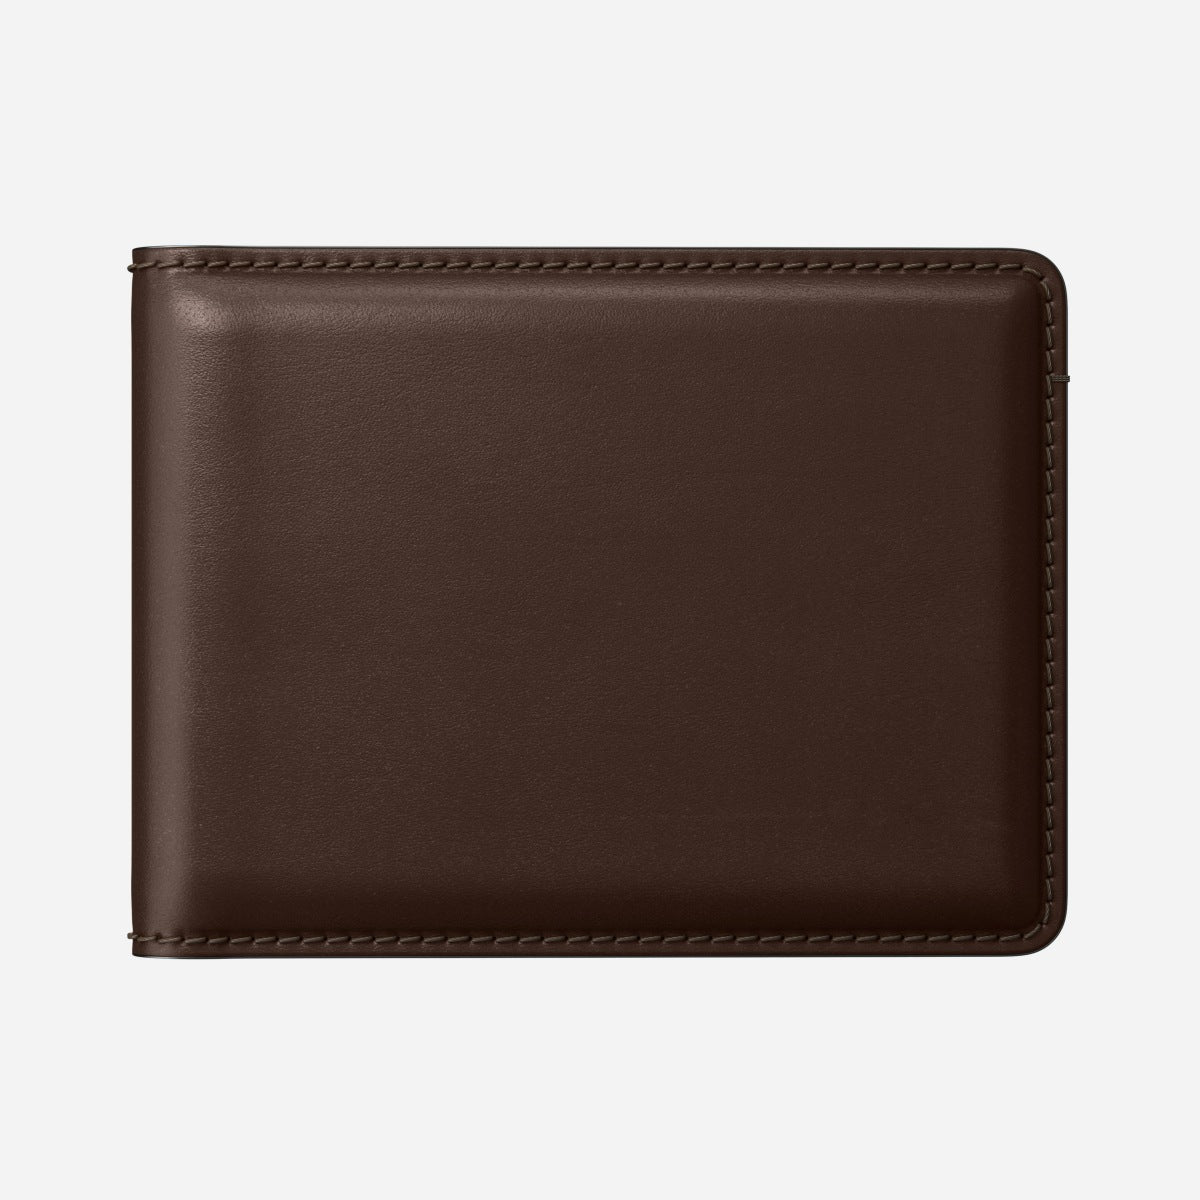 Nomad Bifold Wallet - Storming Gravity